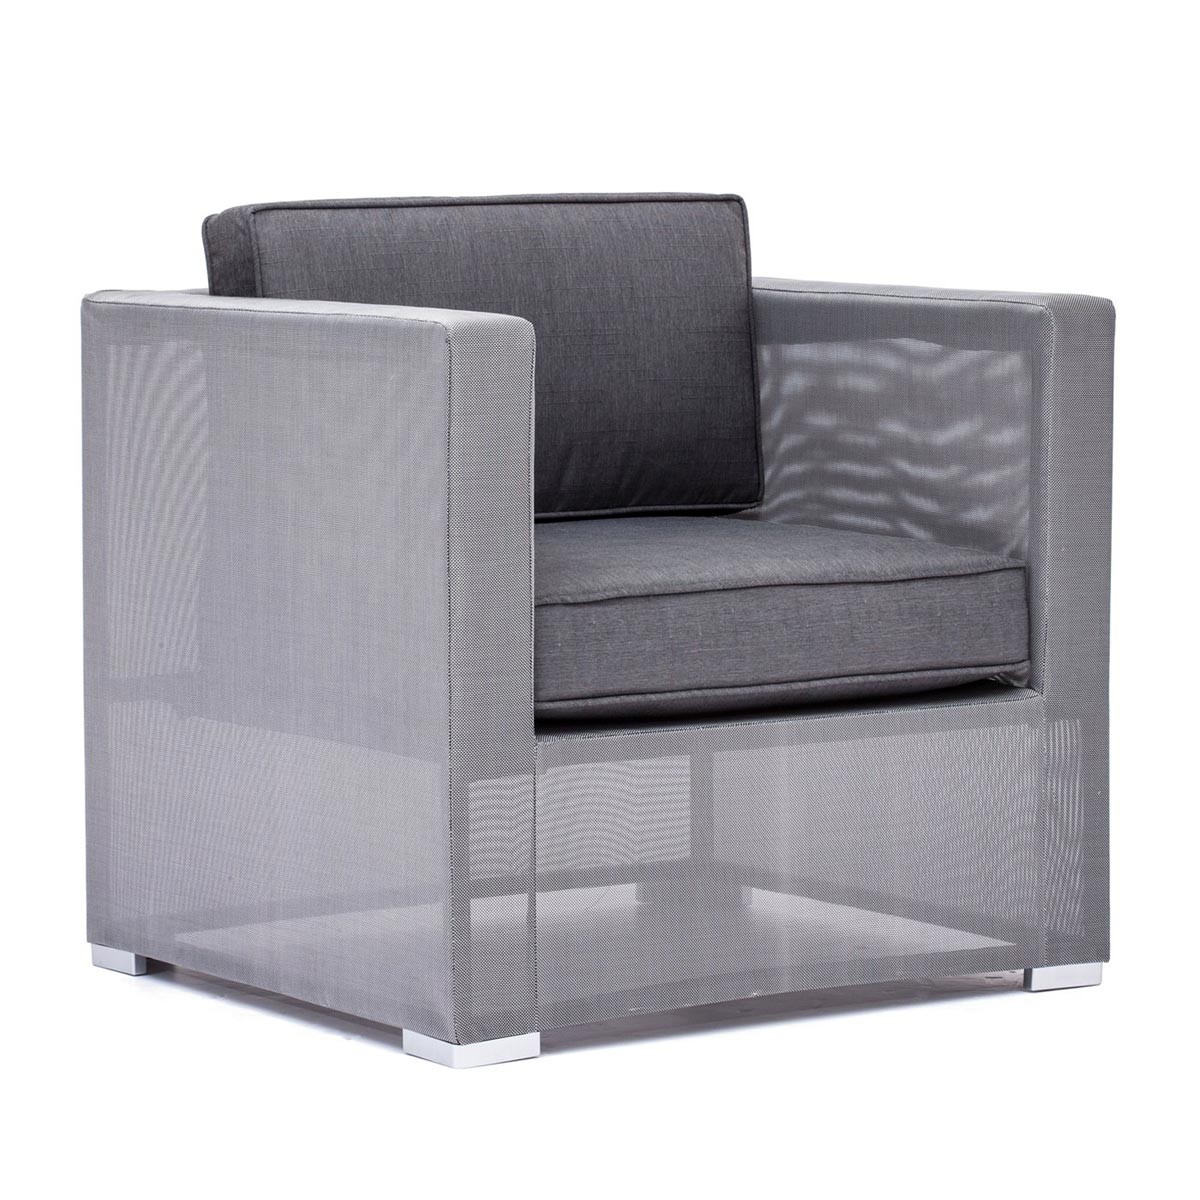 Zuo Modern Clear Water Bay Arm Chair - Gray